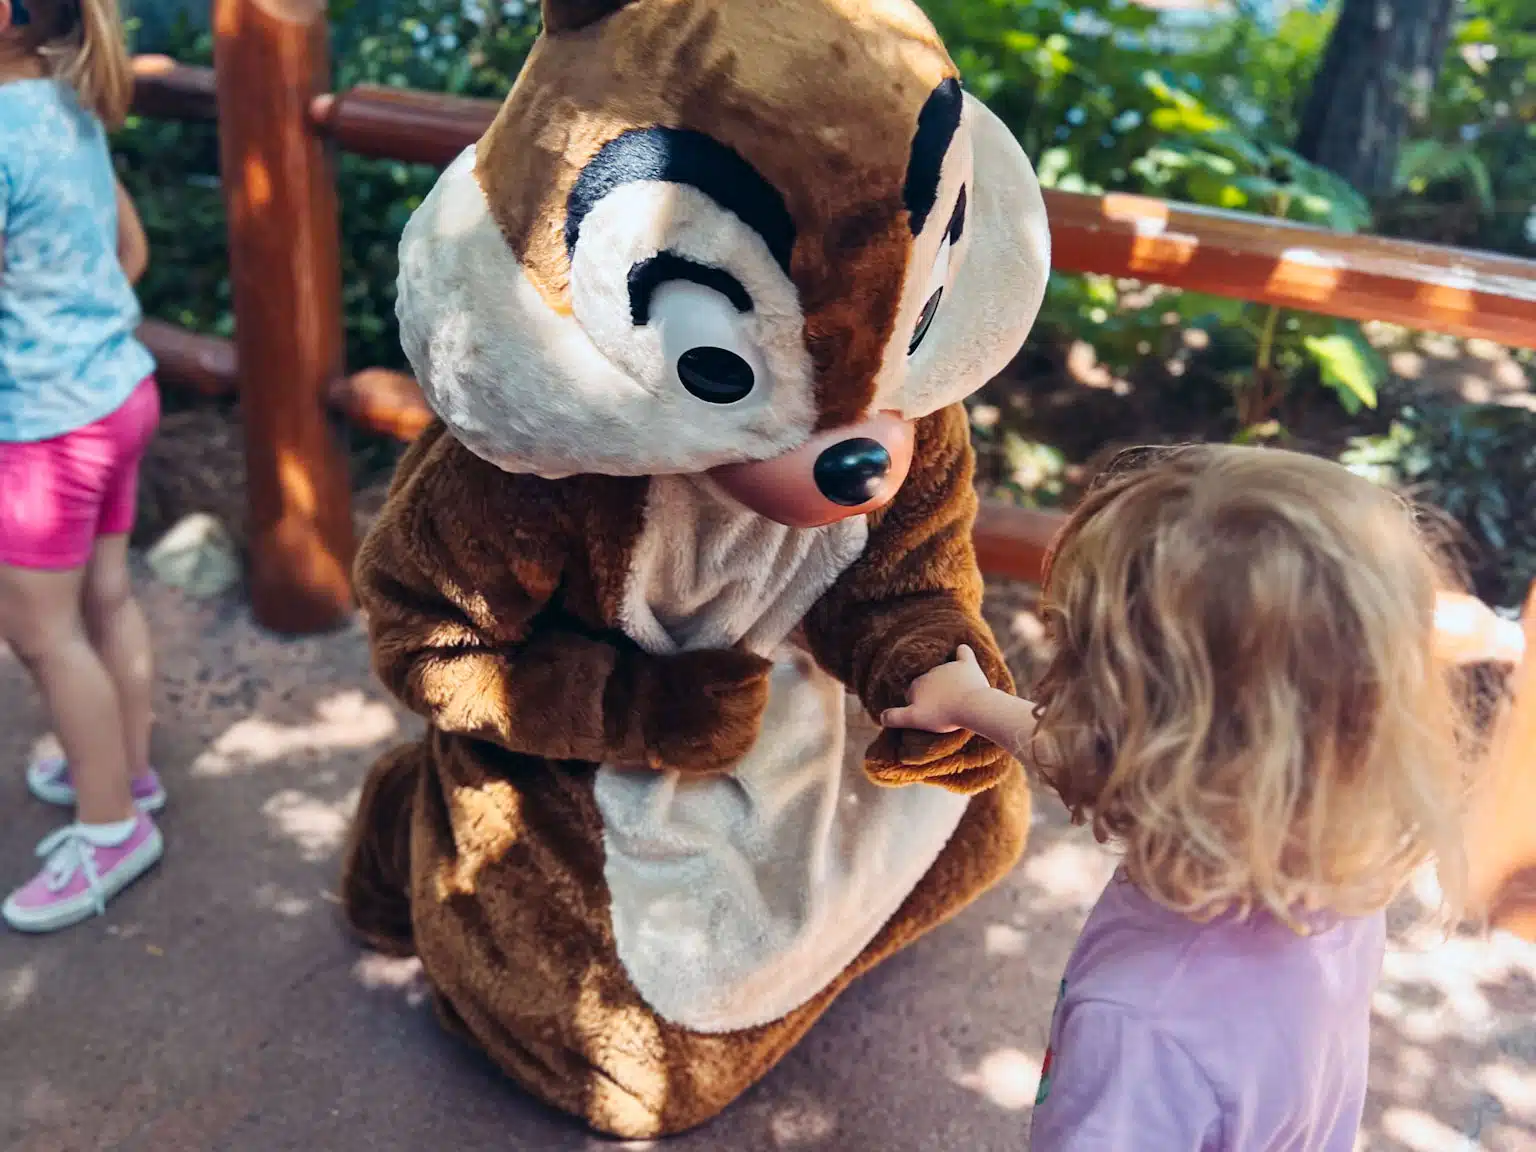 Meeting Chip and Dale.